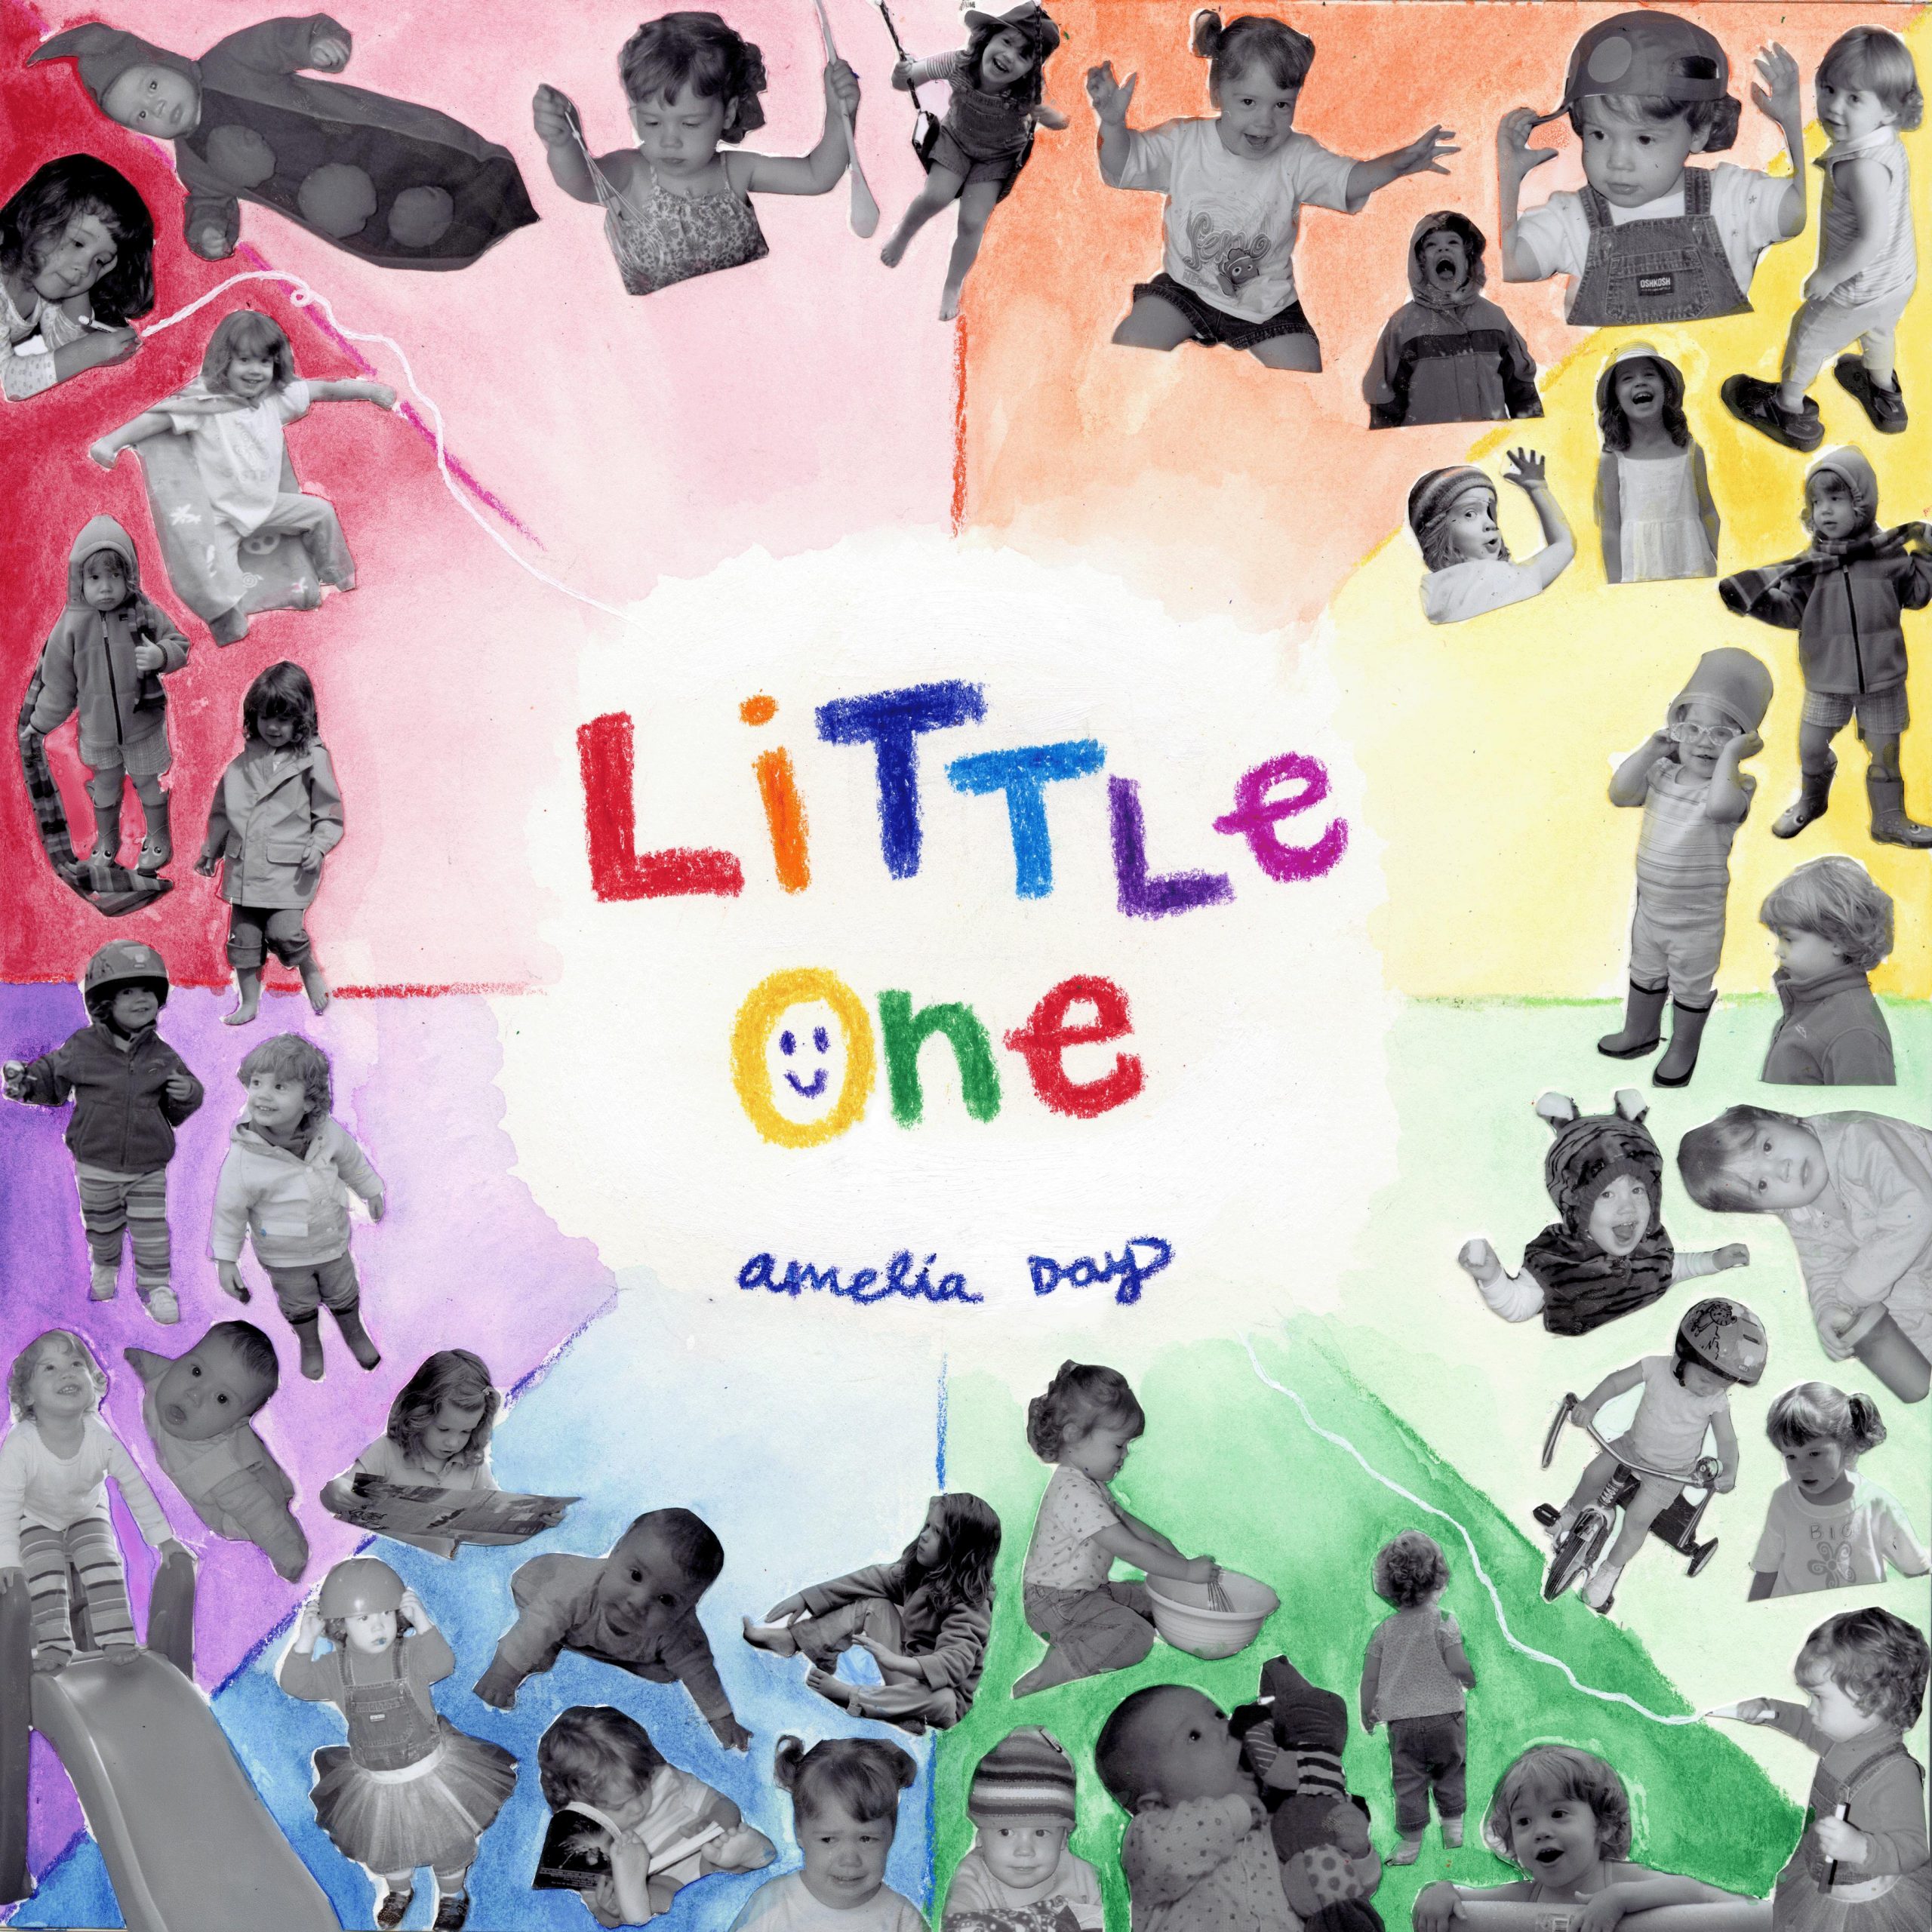 The cover of "Little One," an EP by Amelia Day. It is divided into eight sections with each section being in a different color of the rainbow, colored in with crayon and watercolor paint. It reads "Little One. Amelia Day" in various crayon colors; there is a smiley face in the "O". All around the centered text are black and white images of Amelia, a white girl, as a young child.